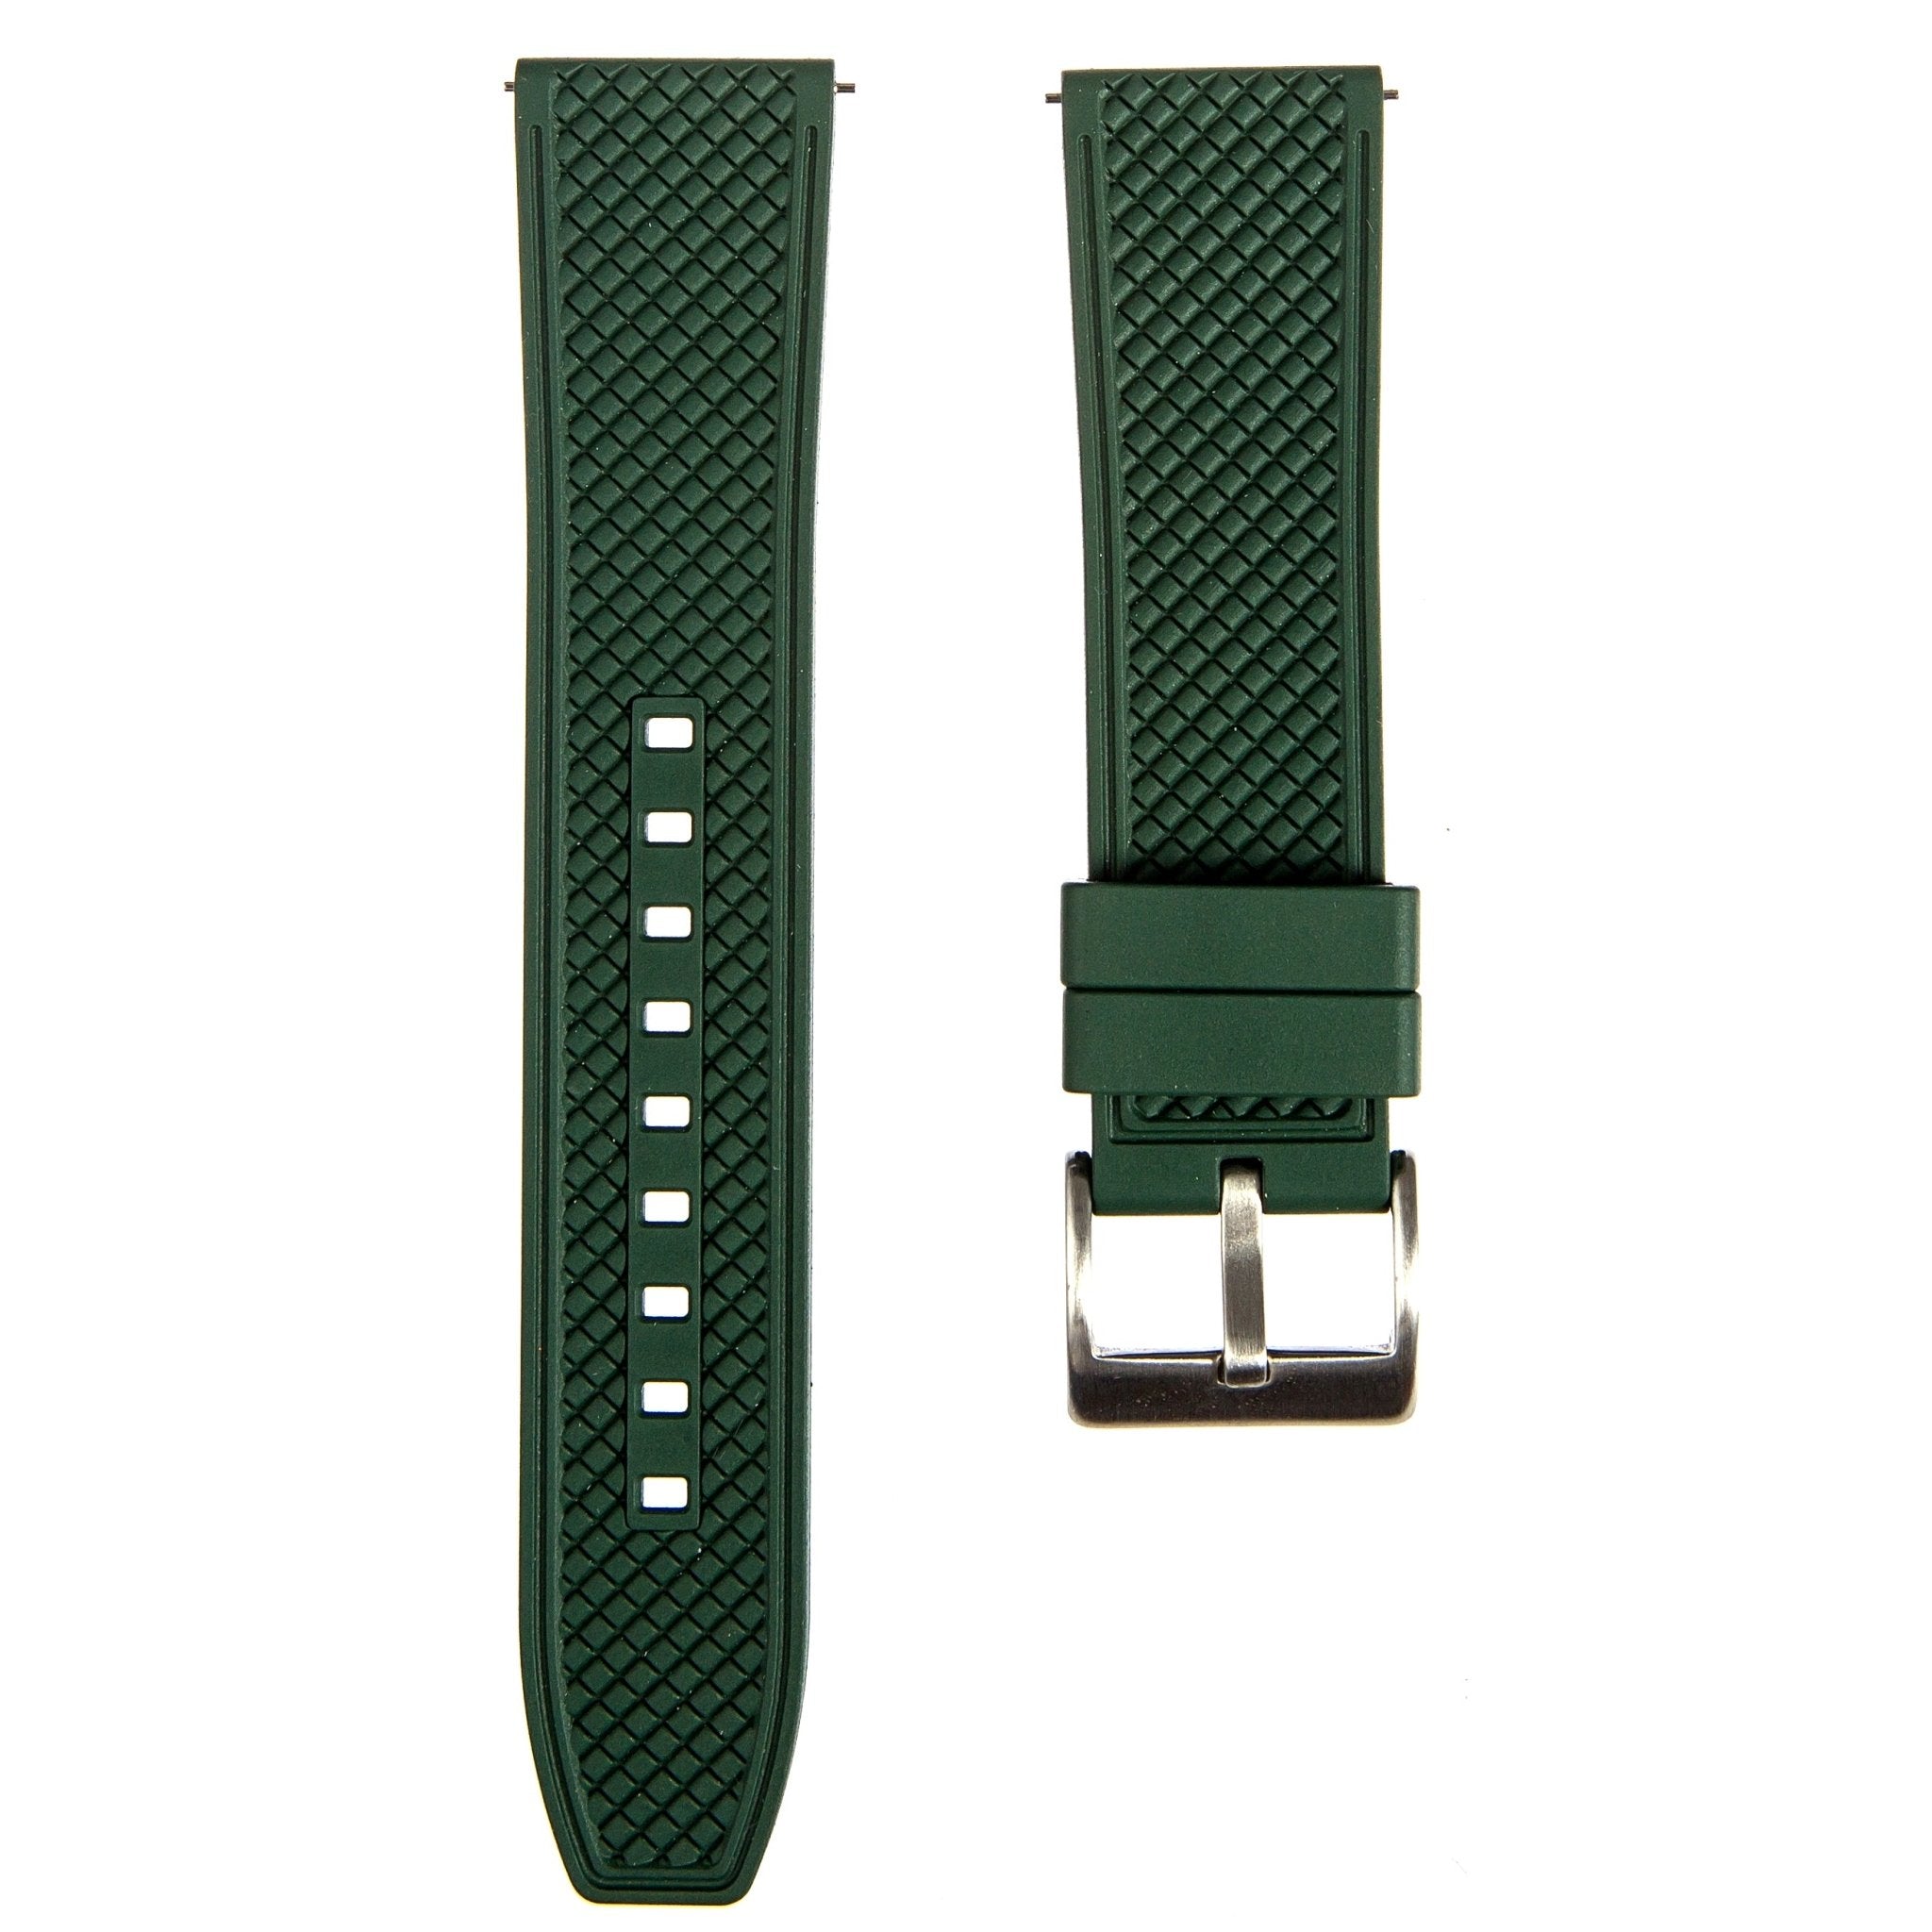 Checker Vulcanised FKM Rubber Strap-Quick-Release – Compatible with Omega Seamaster 300 – Green (2419) -StrapSeeker